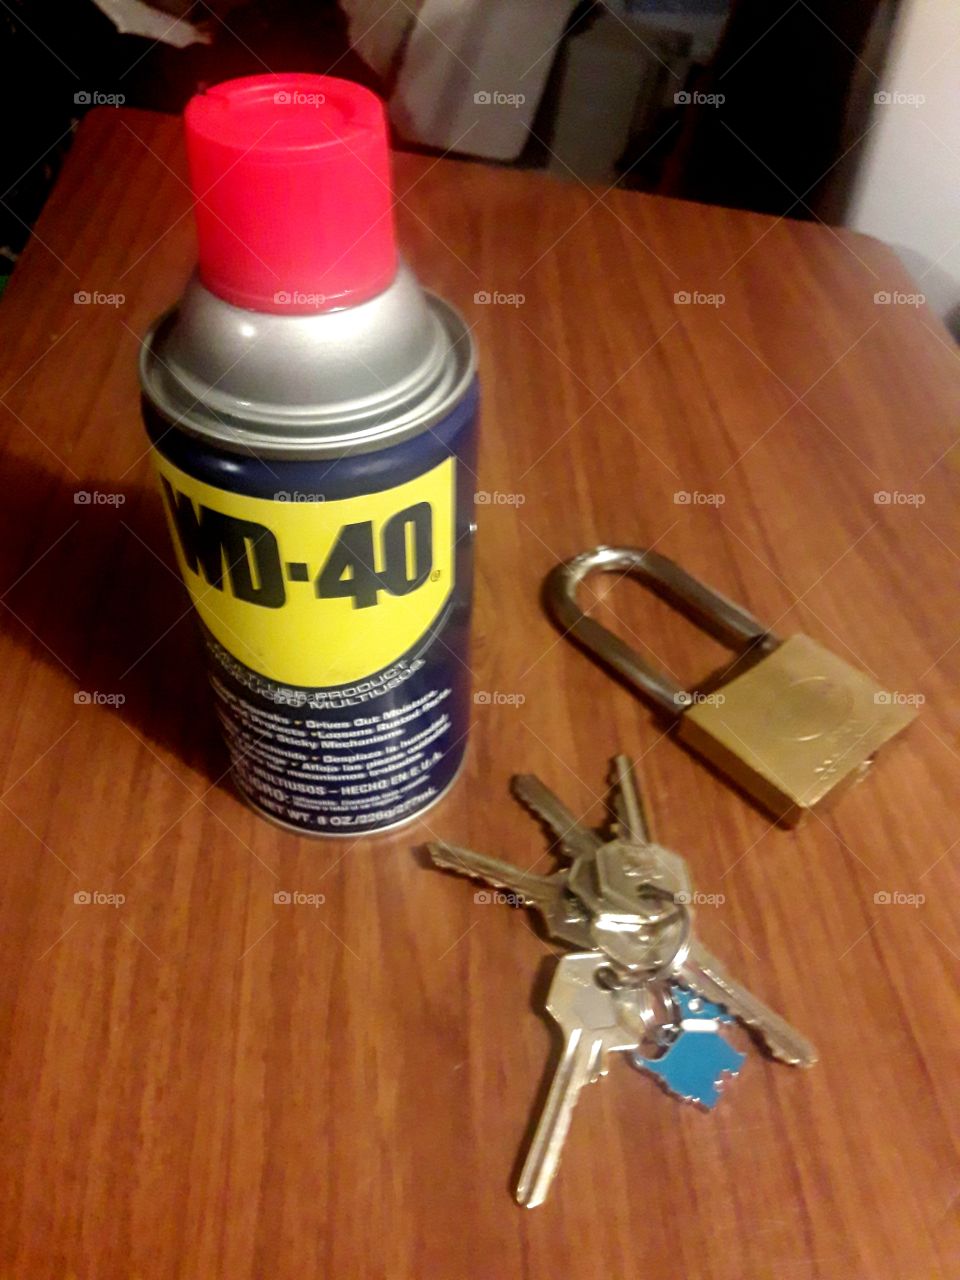 Wd_40